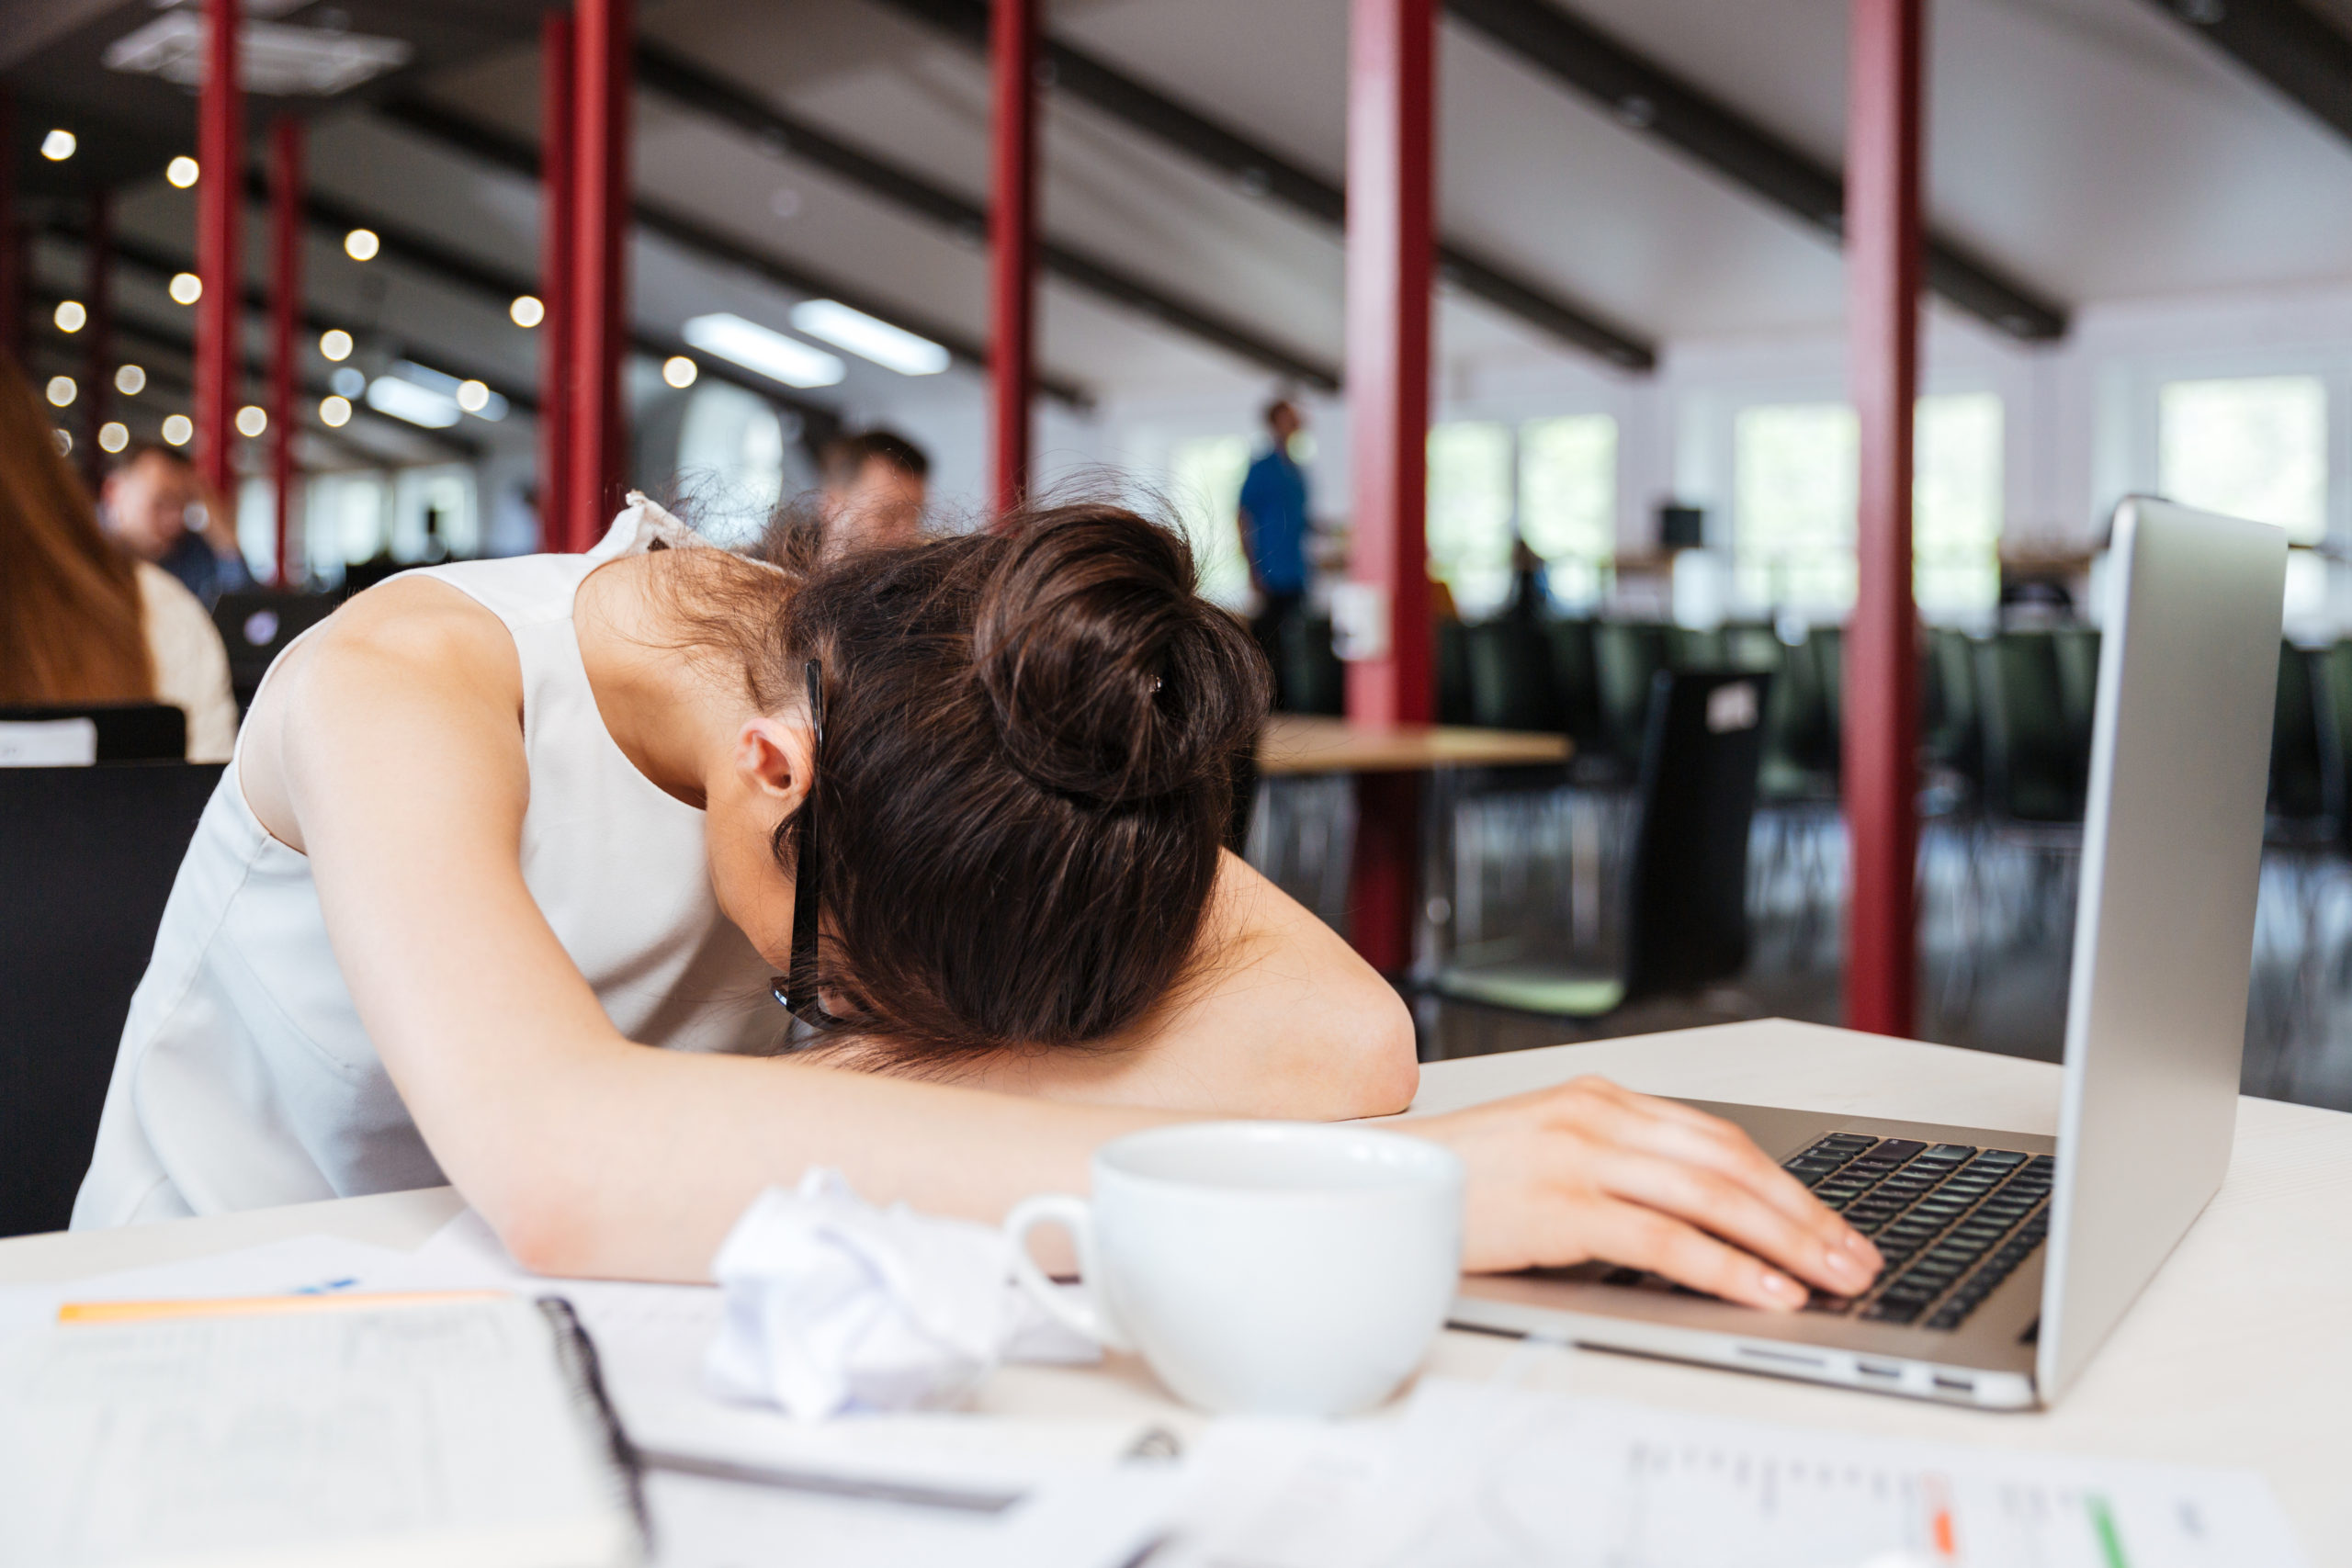 Exhausted fatigued young business woman sleeping on table with laptop at workplace